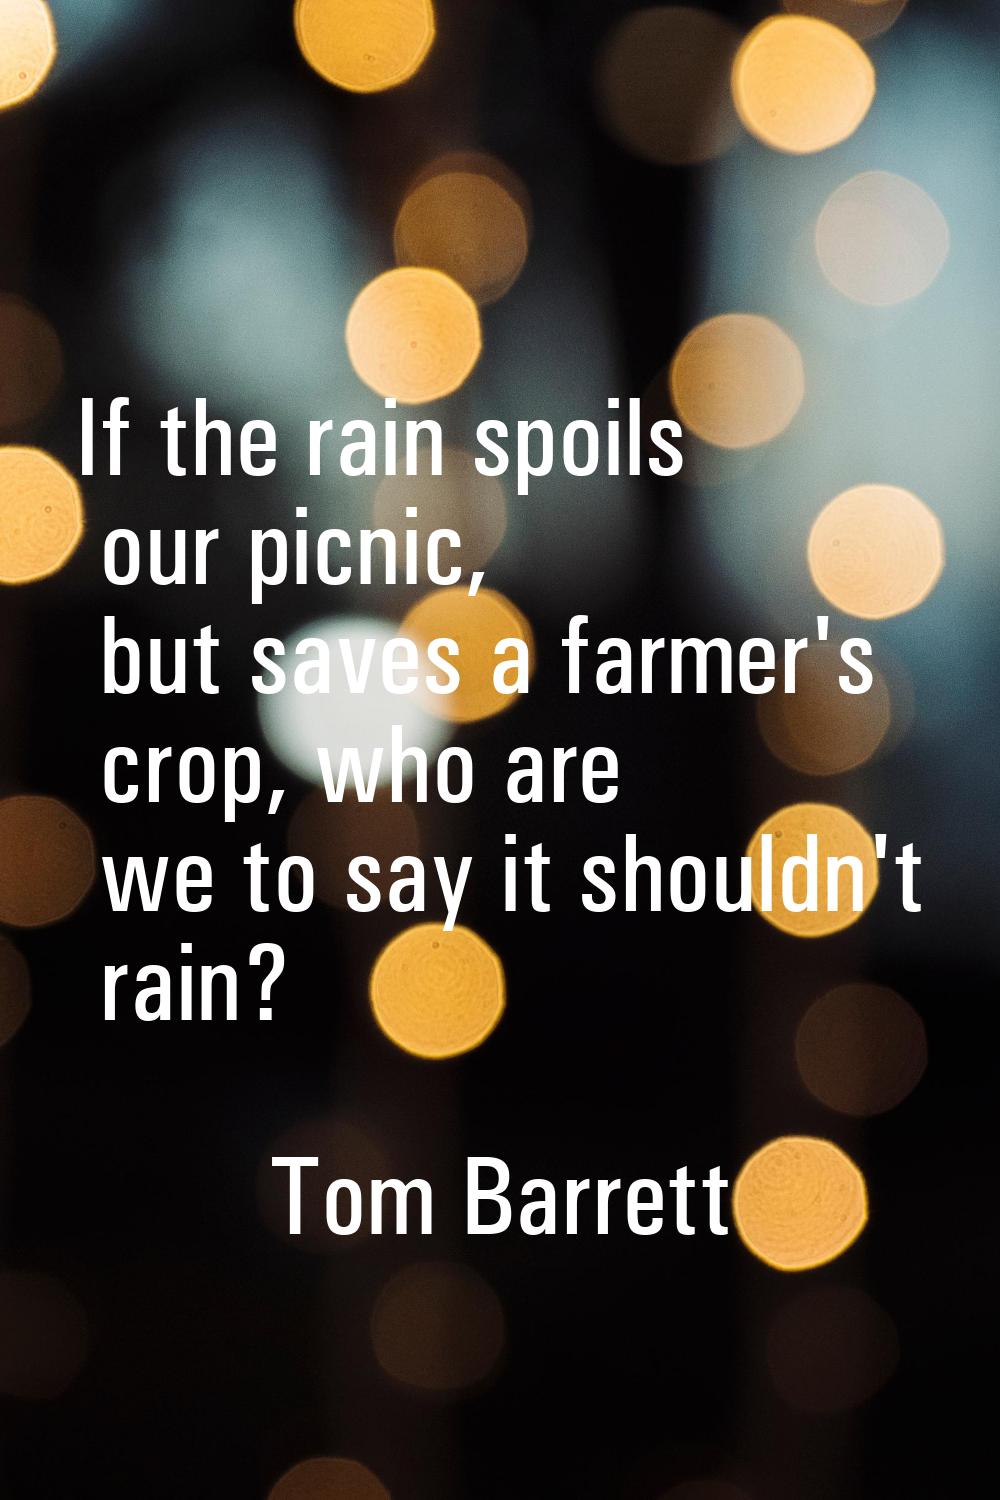 If the rain spoils our picnic, but saves a farmer's crop, who are we to say it shouldn't rain?